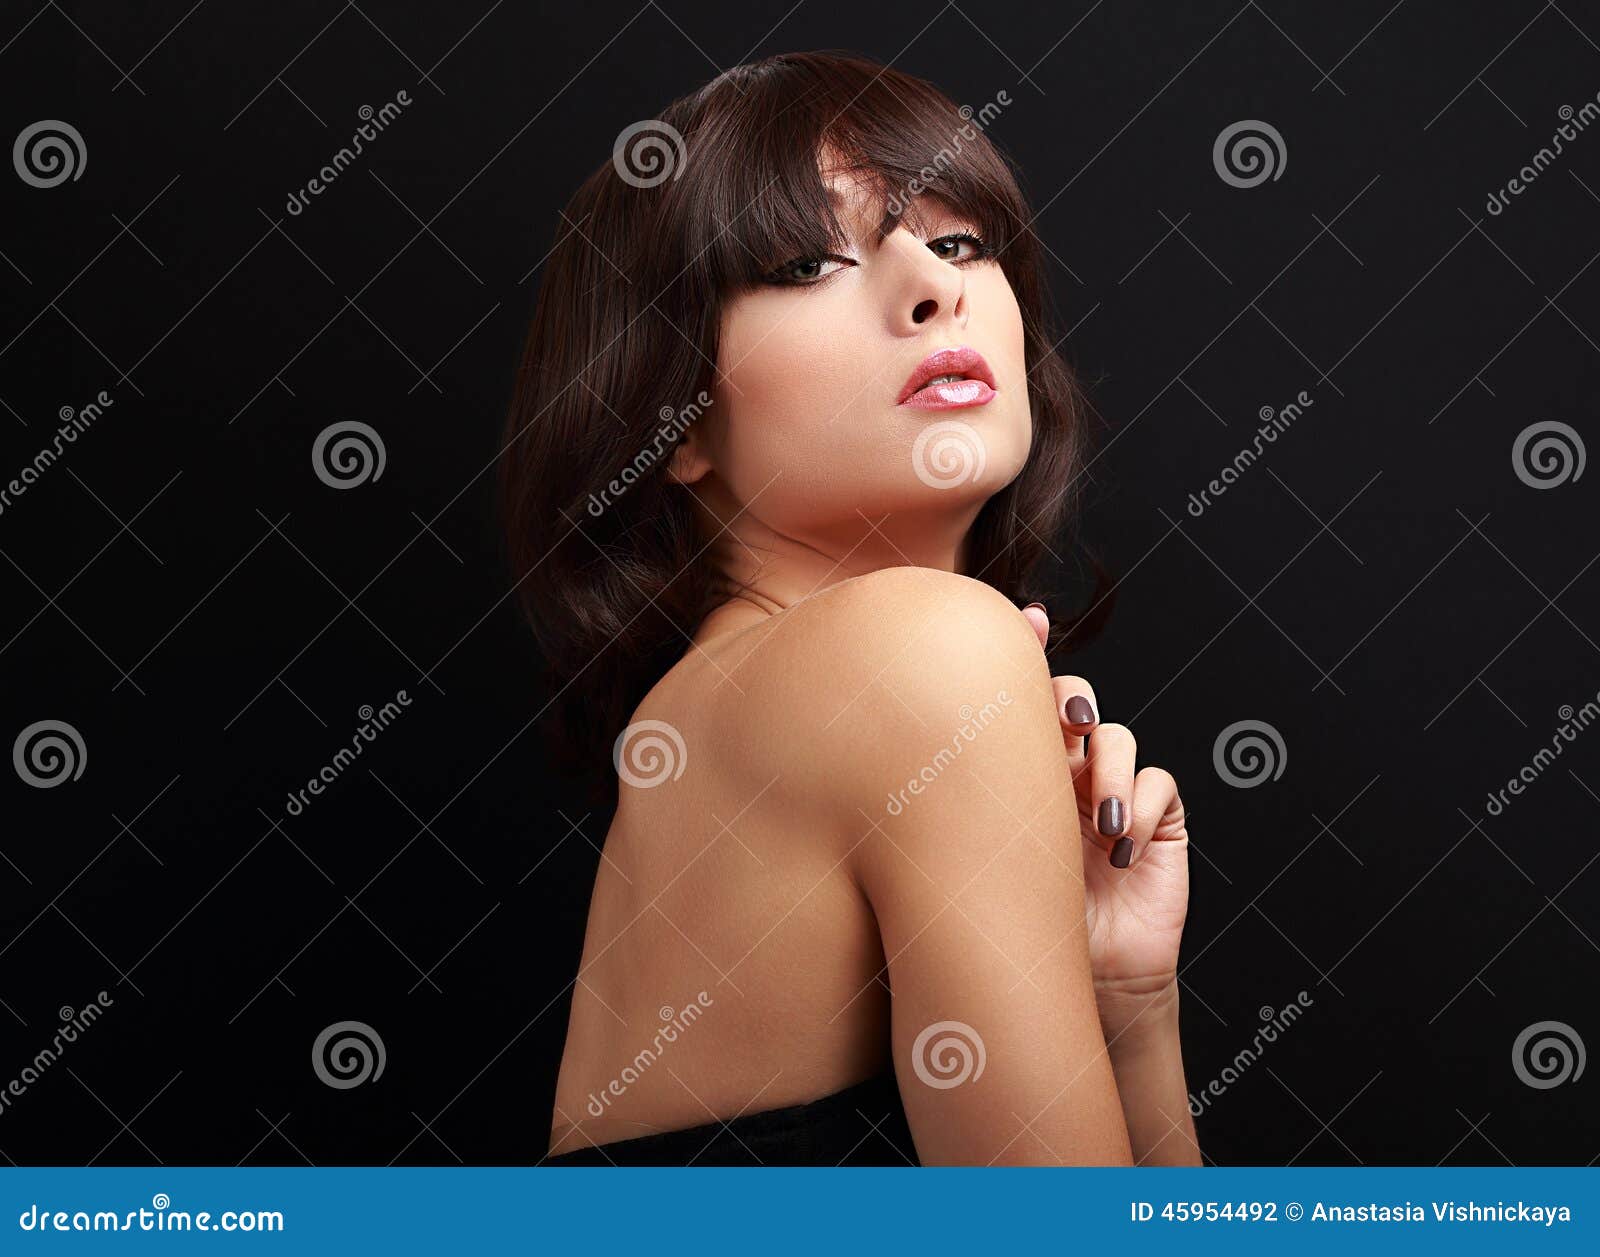 Sexual Makeup Woman with Short Hair Style Stock Photo